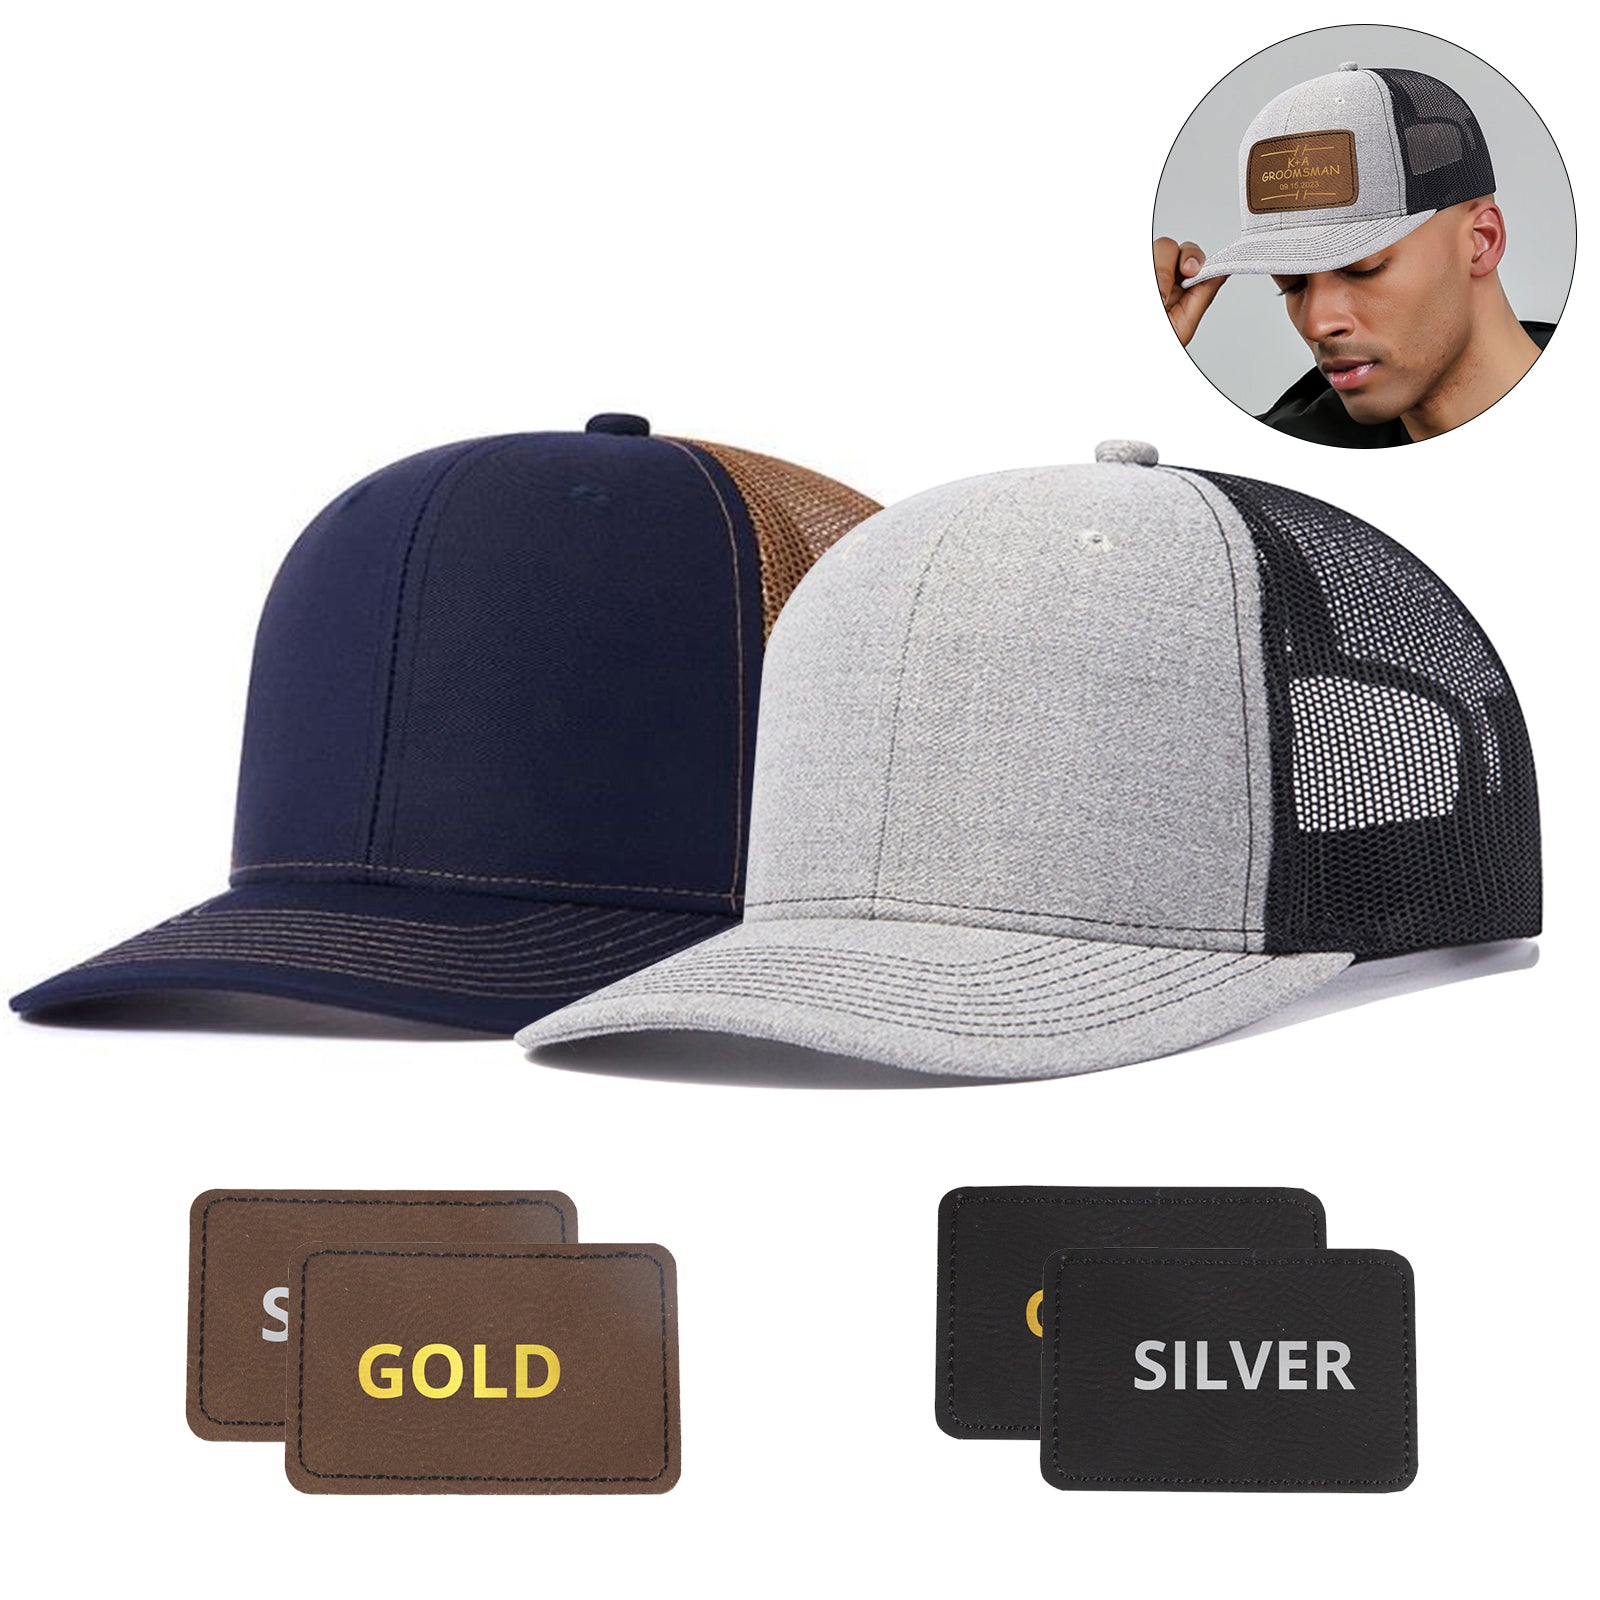 Two trucker hats are displayed side-by-side. One cap is navy blue with a brown mesh back, and the other is light gray with a black mesh back. Below the hats are four rectangular patches in gold and silver. Inset image shows a person wearing one of these caps, making the CrealityFalcon 2 pcs Adjustable Mesh Trucker Hat with 4pcs Cap Stickers for Engraving a perfect gift for men.